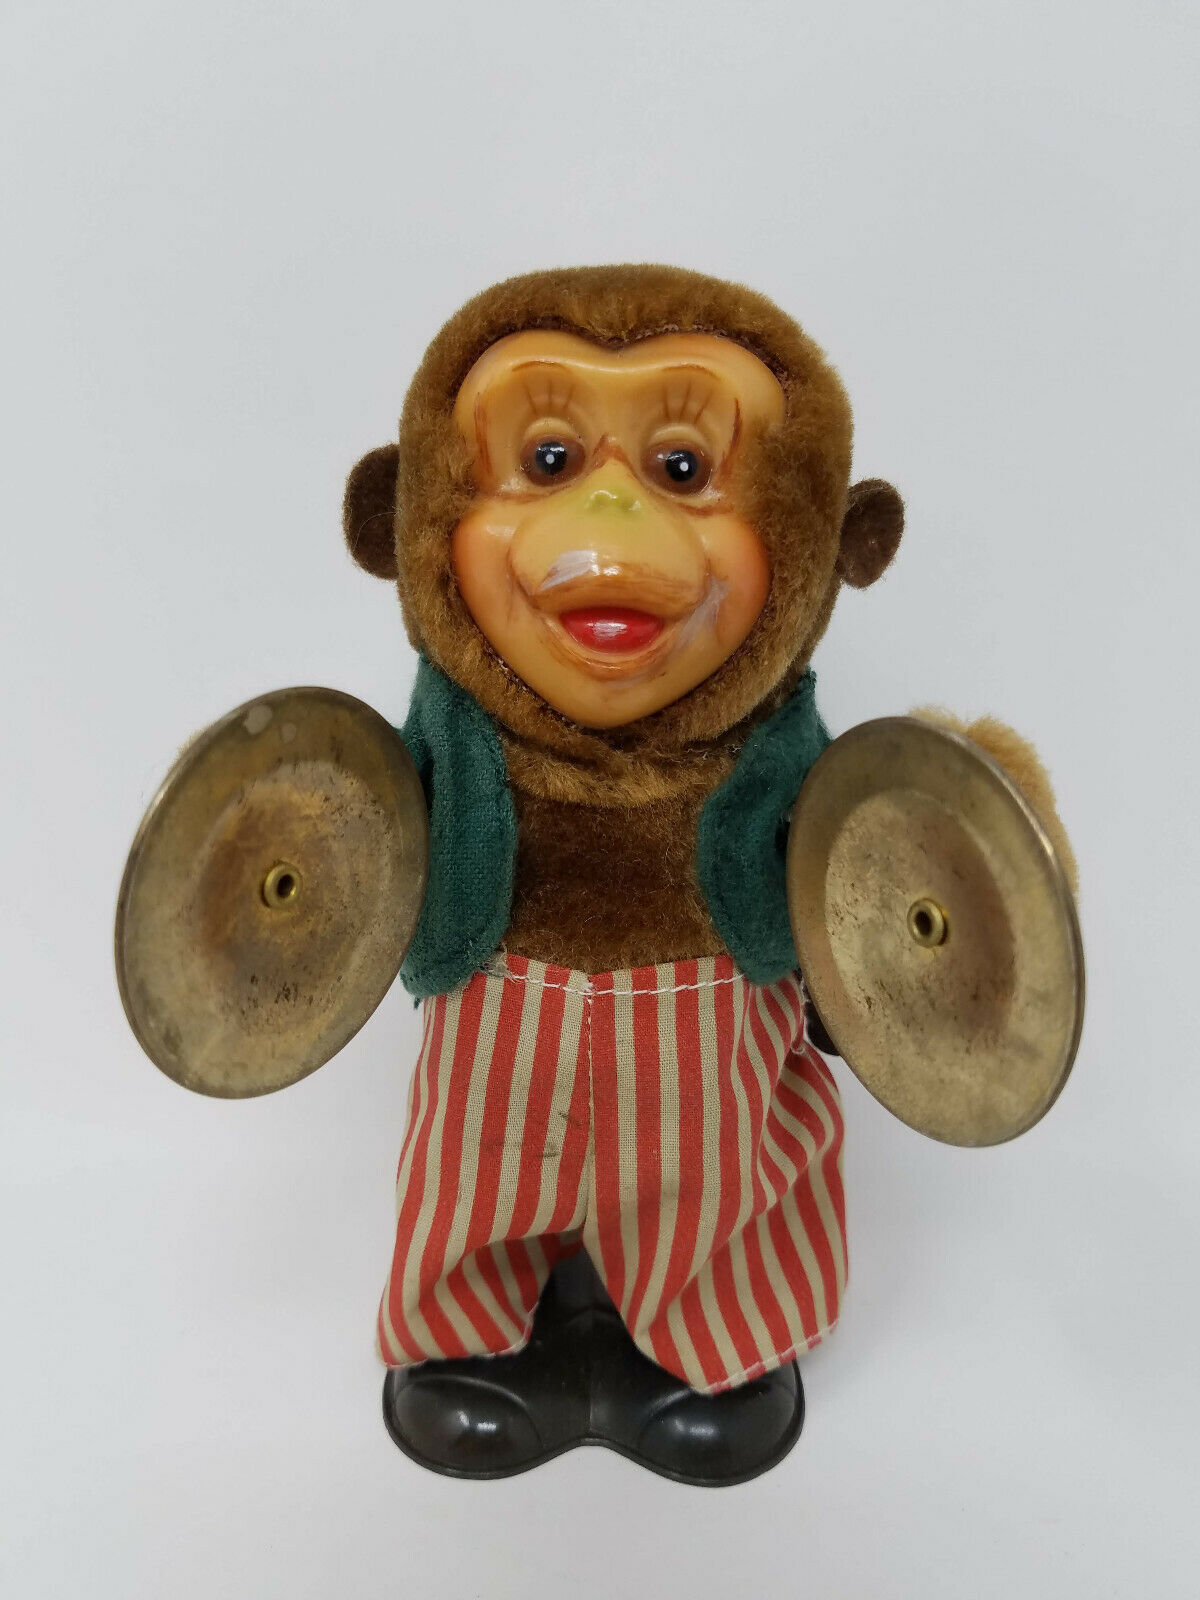 Vintage 5.5" Tall Cymbal Playing Monkey Furry Wind-up Toy Working Rare